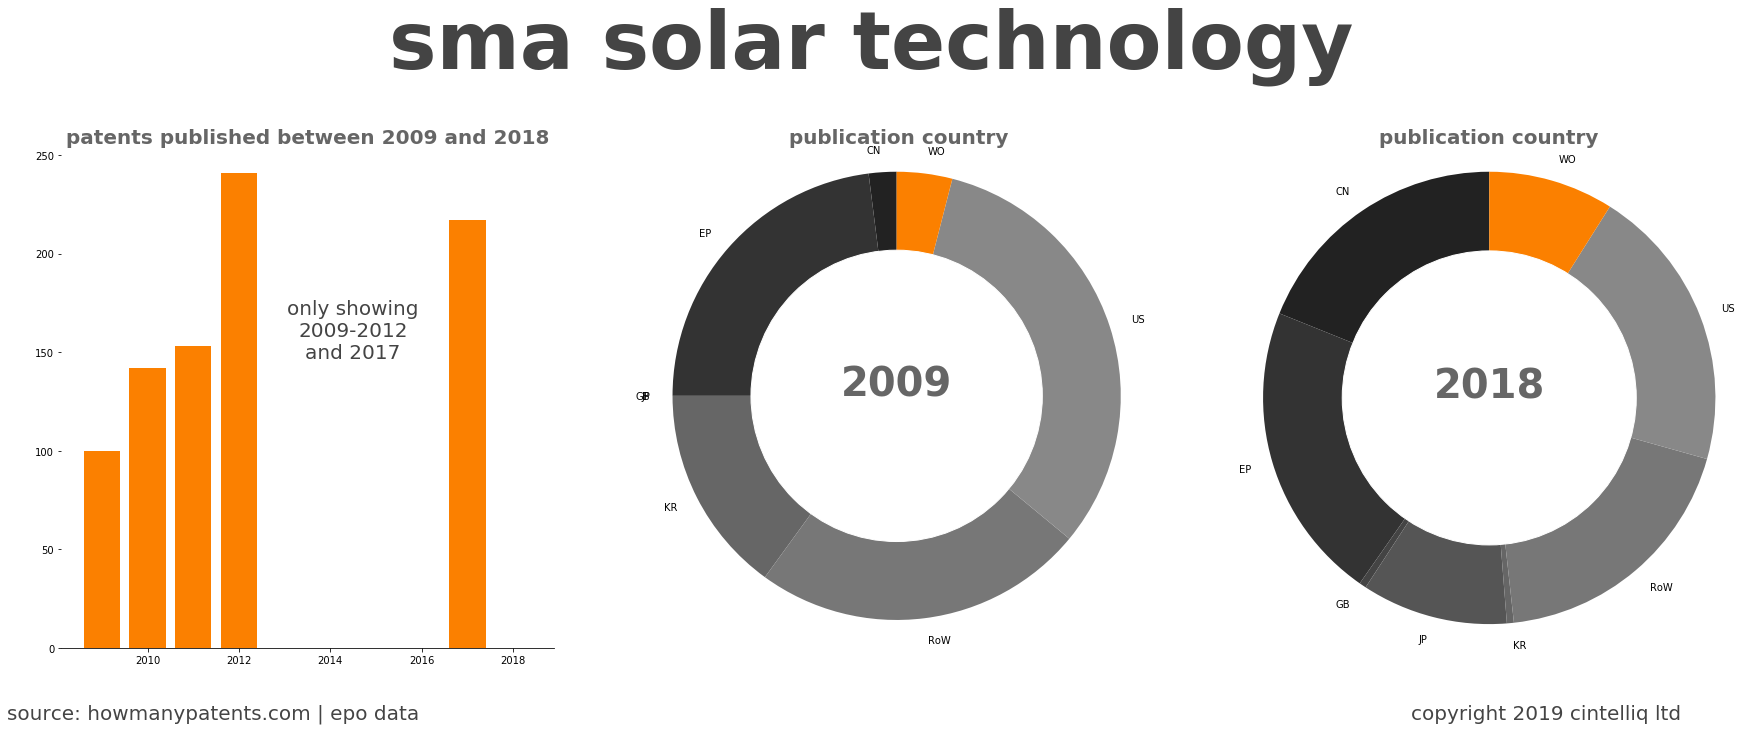 summary of patents for Sma Solar Technology